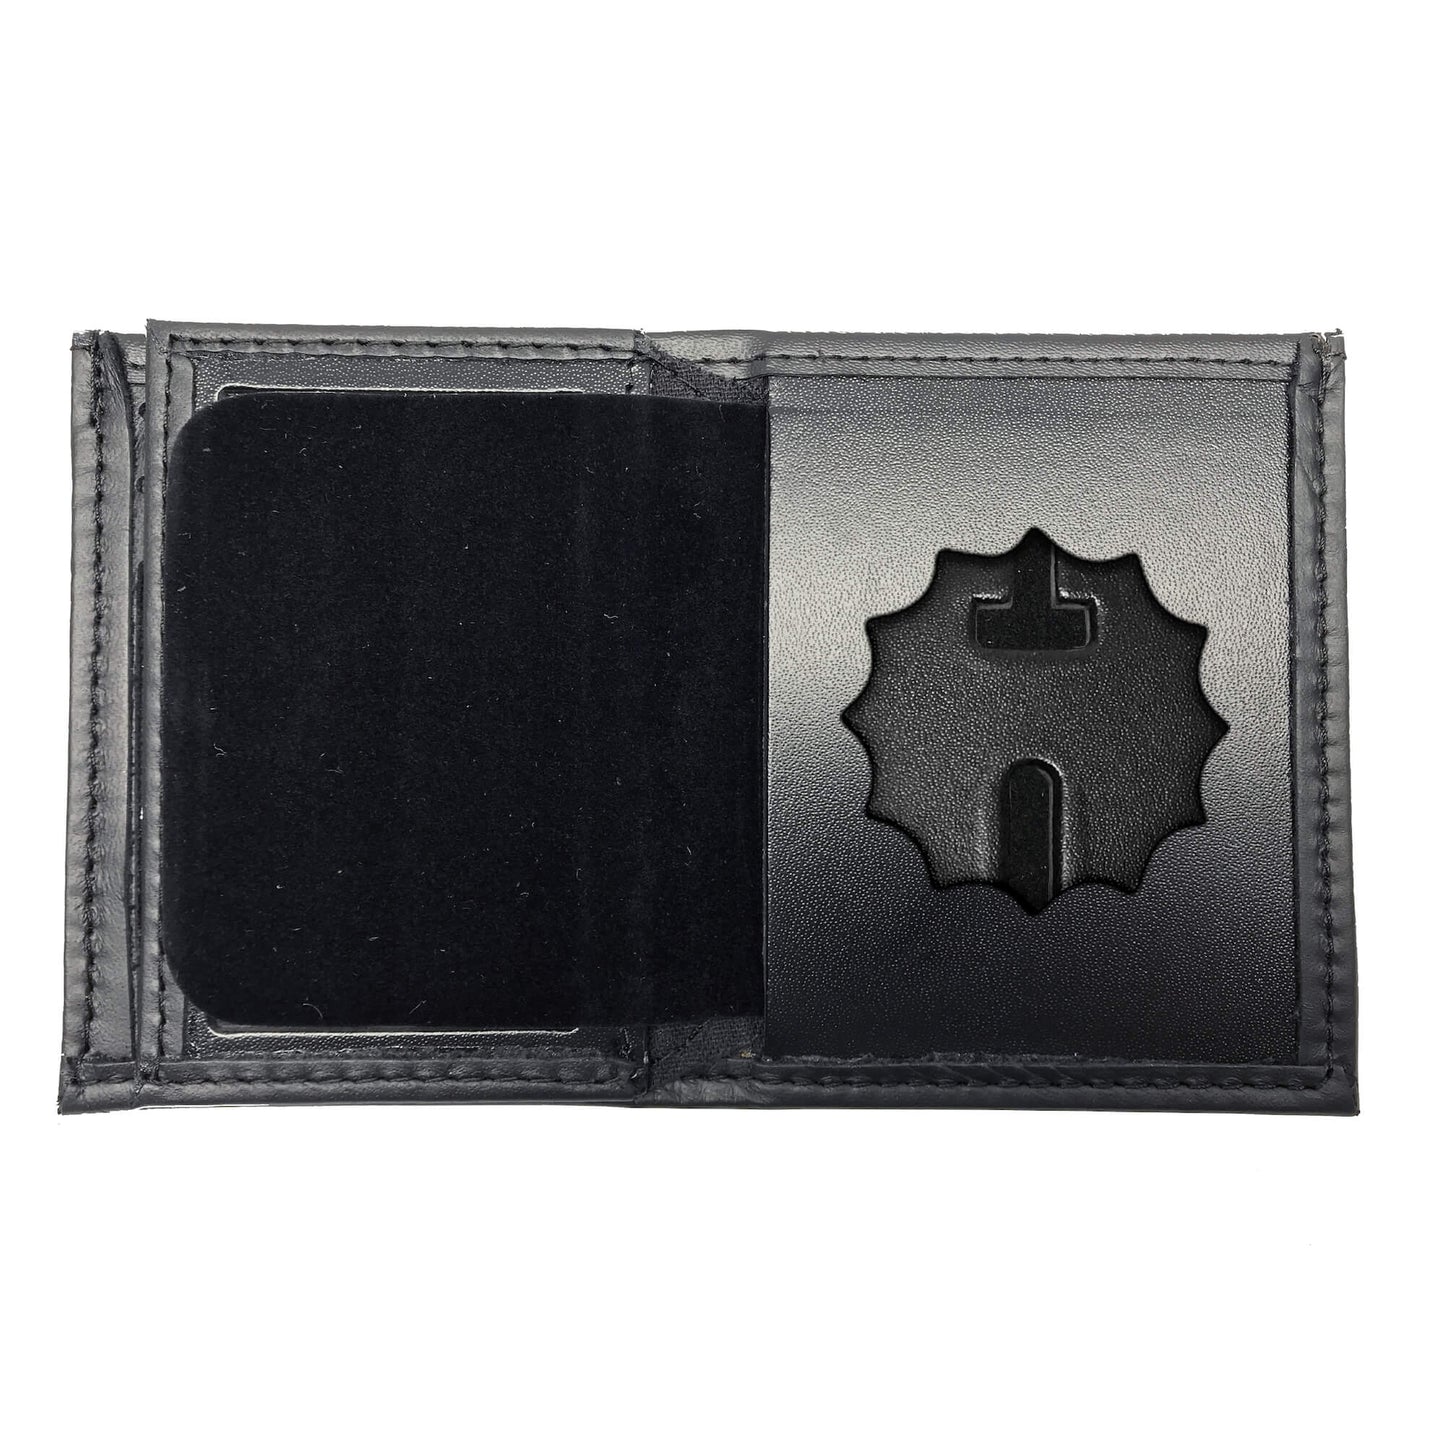 New York Police Department (NYPD) Lieutenant Bifold Hidden Badge Wallet-Perfect Fit-911 Duty Gear USA